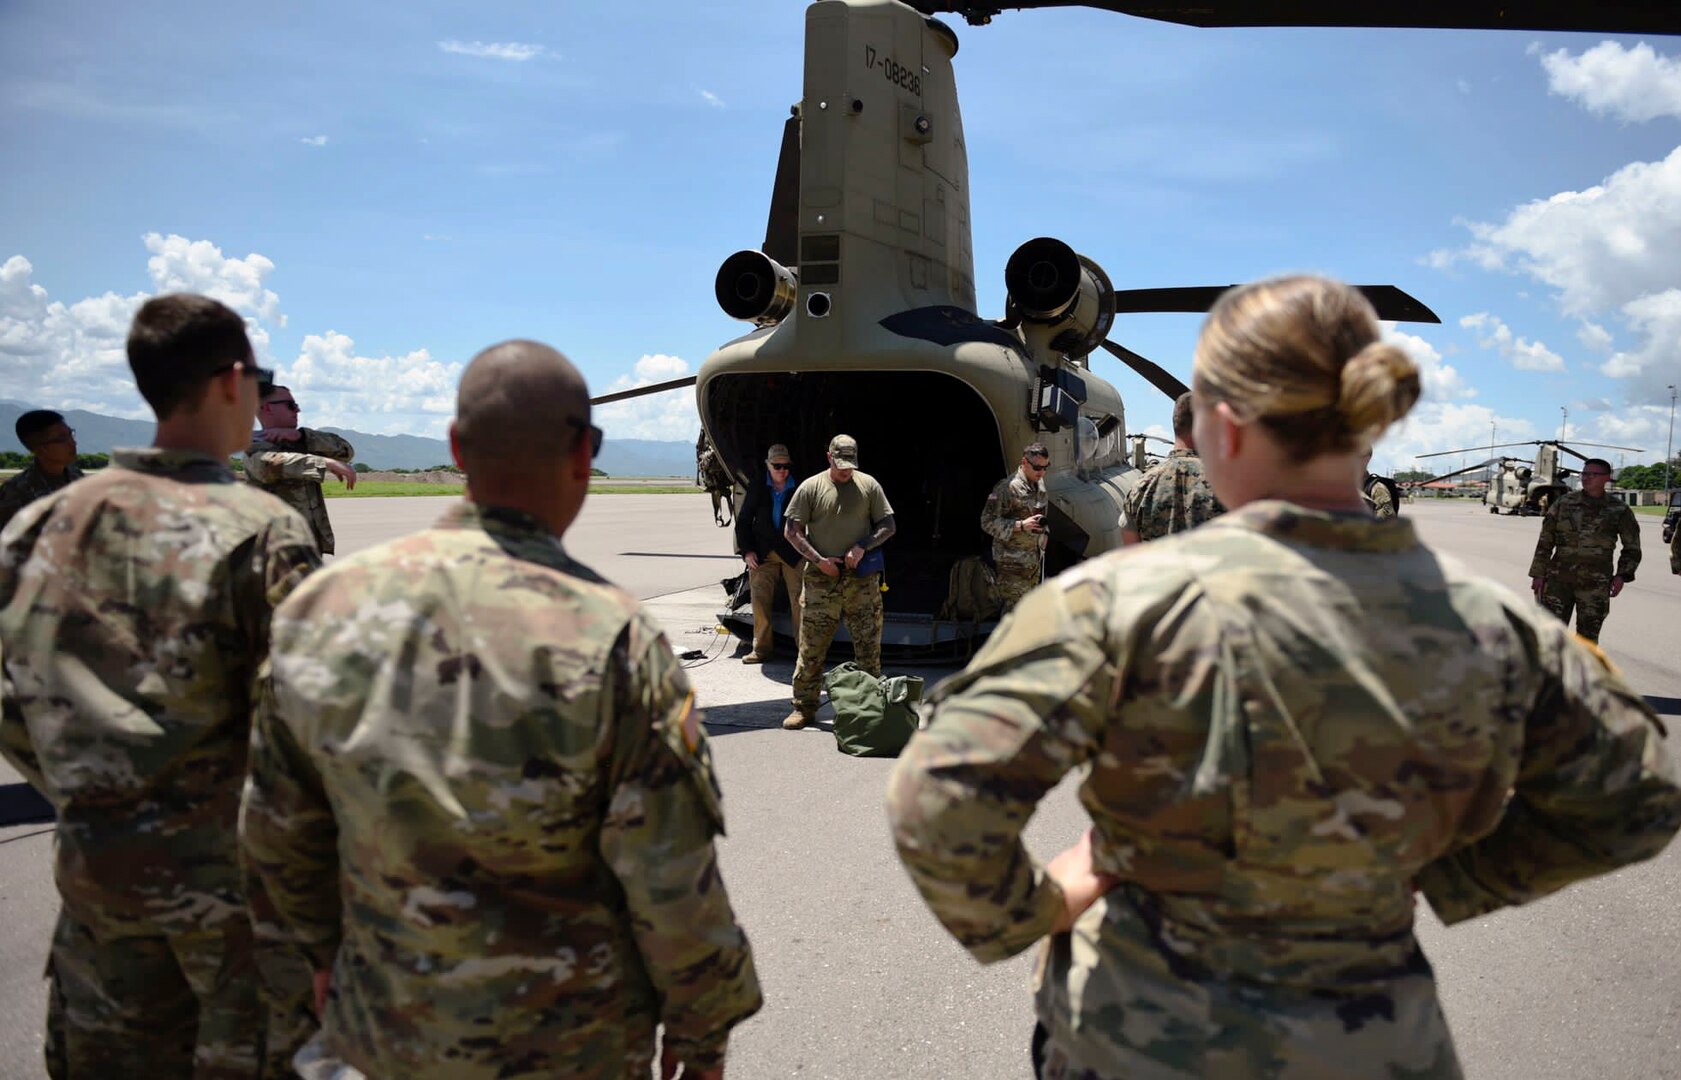 JTF-Bravo deploys assets in support of USSOUTHCOM disaster assistance to Haiti